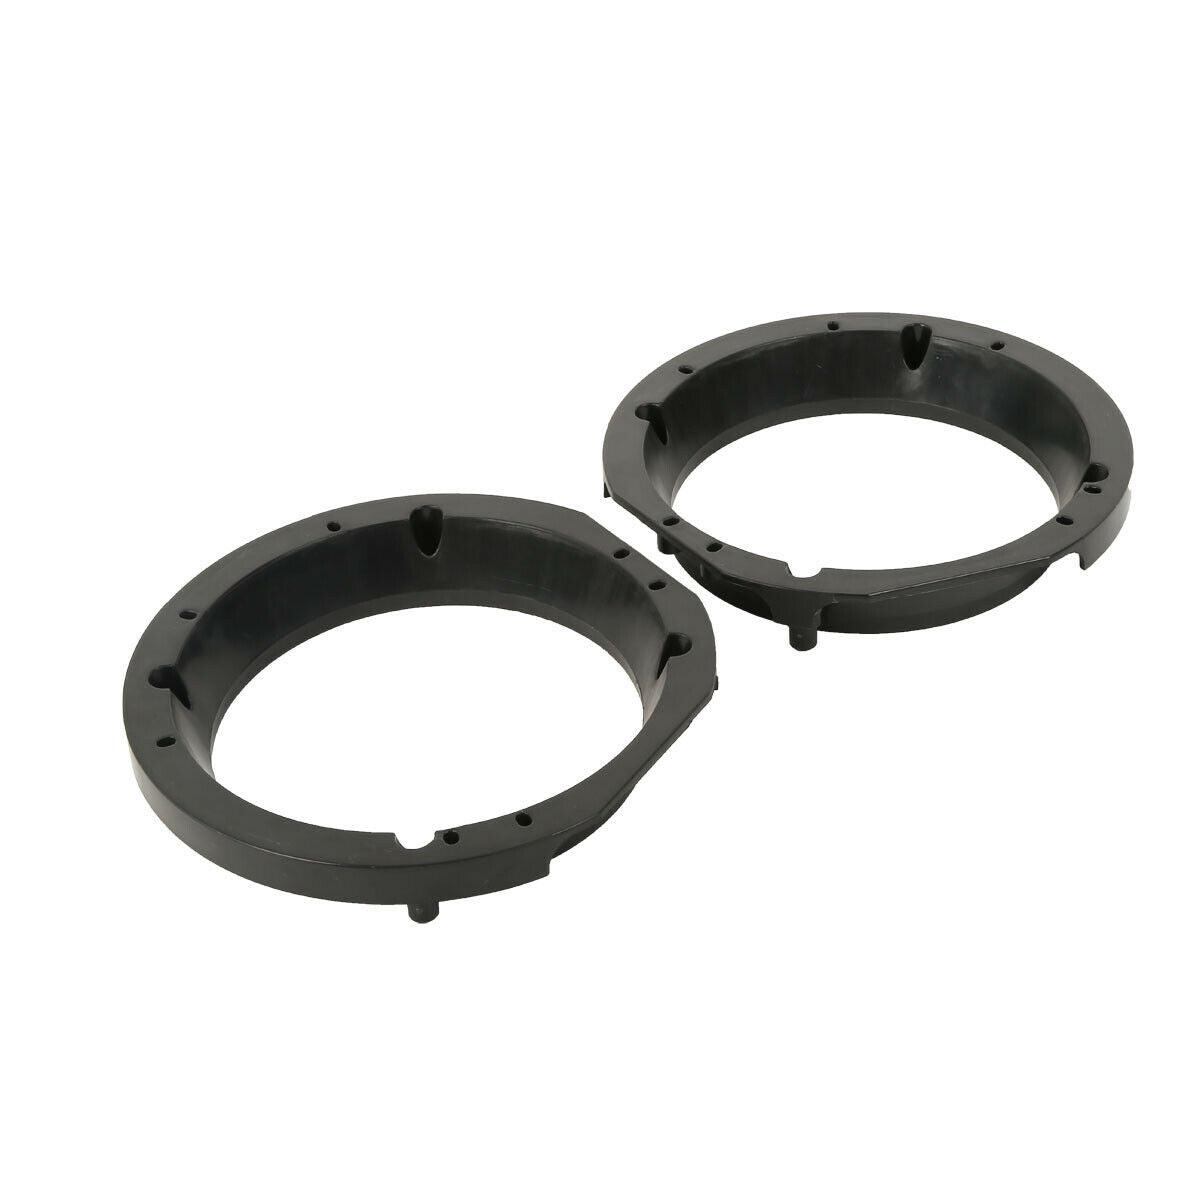 5.25" to 6" Speaker Adapter Ring Fit For Harley Road Electra Street Glide 98-13 - Moto Life Products